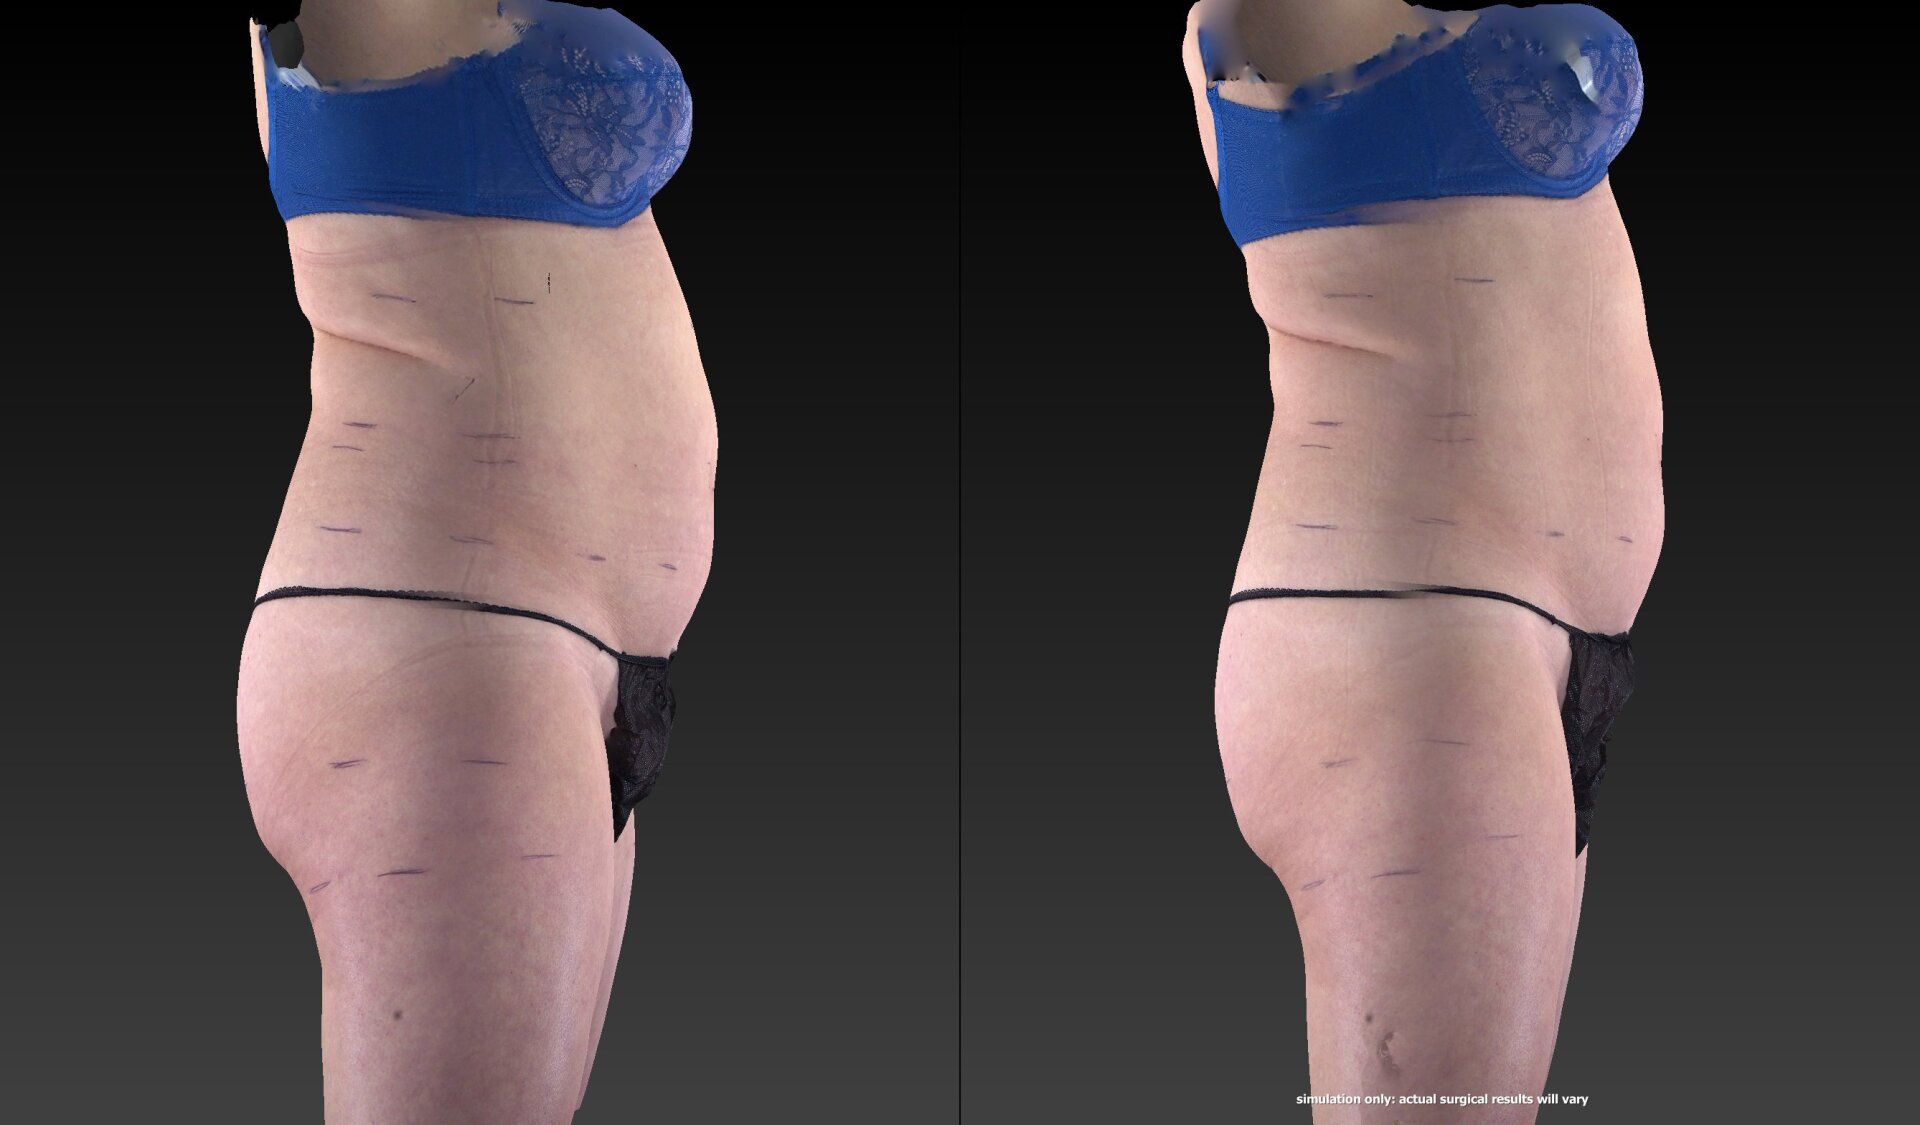 Before and after photo of a woman who received an UltraSlim treatment